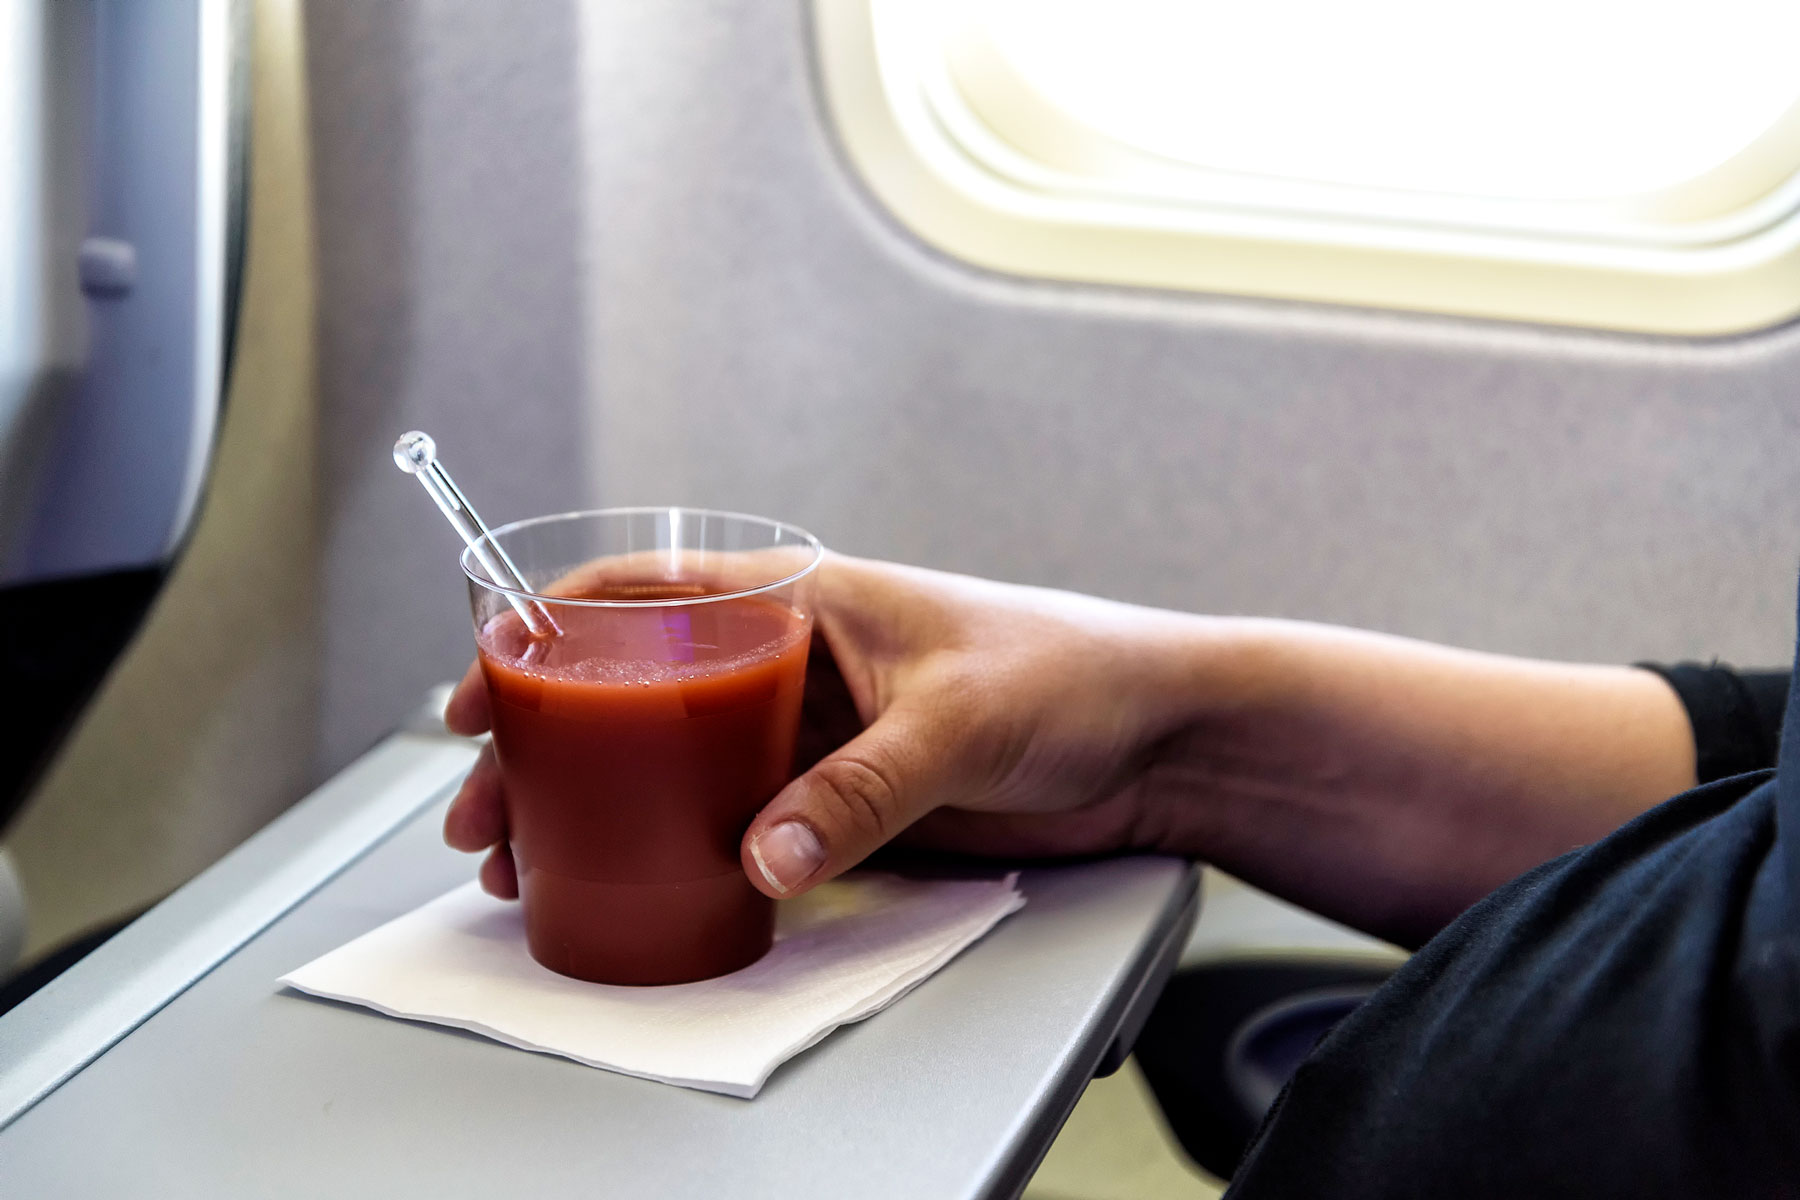 Tomato Juice In An Airplane